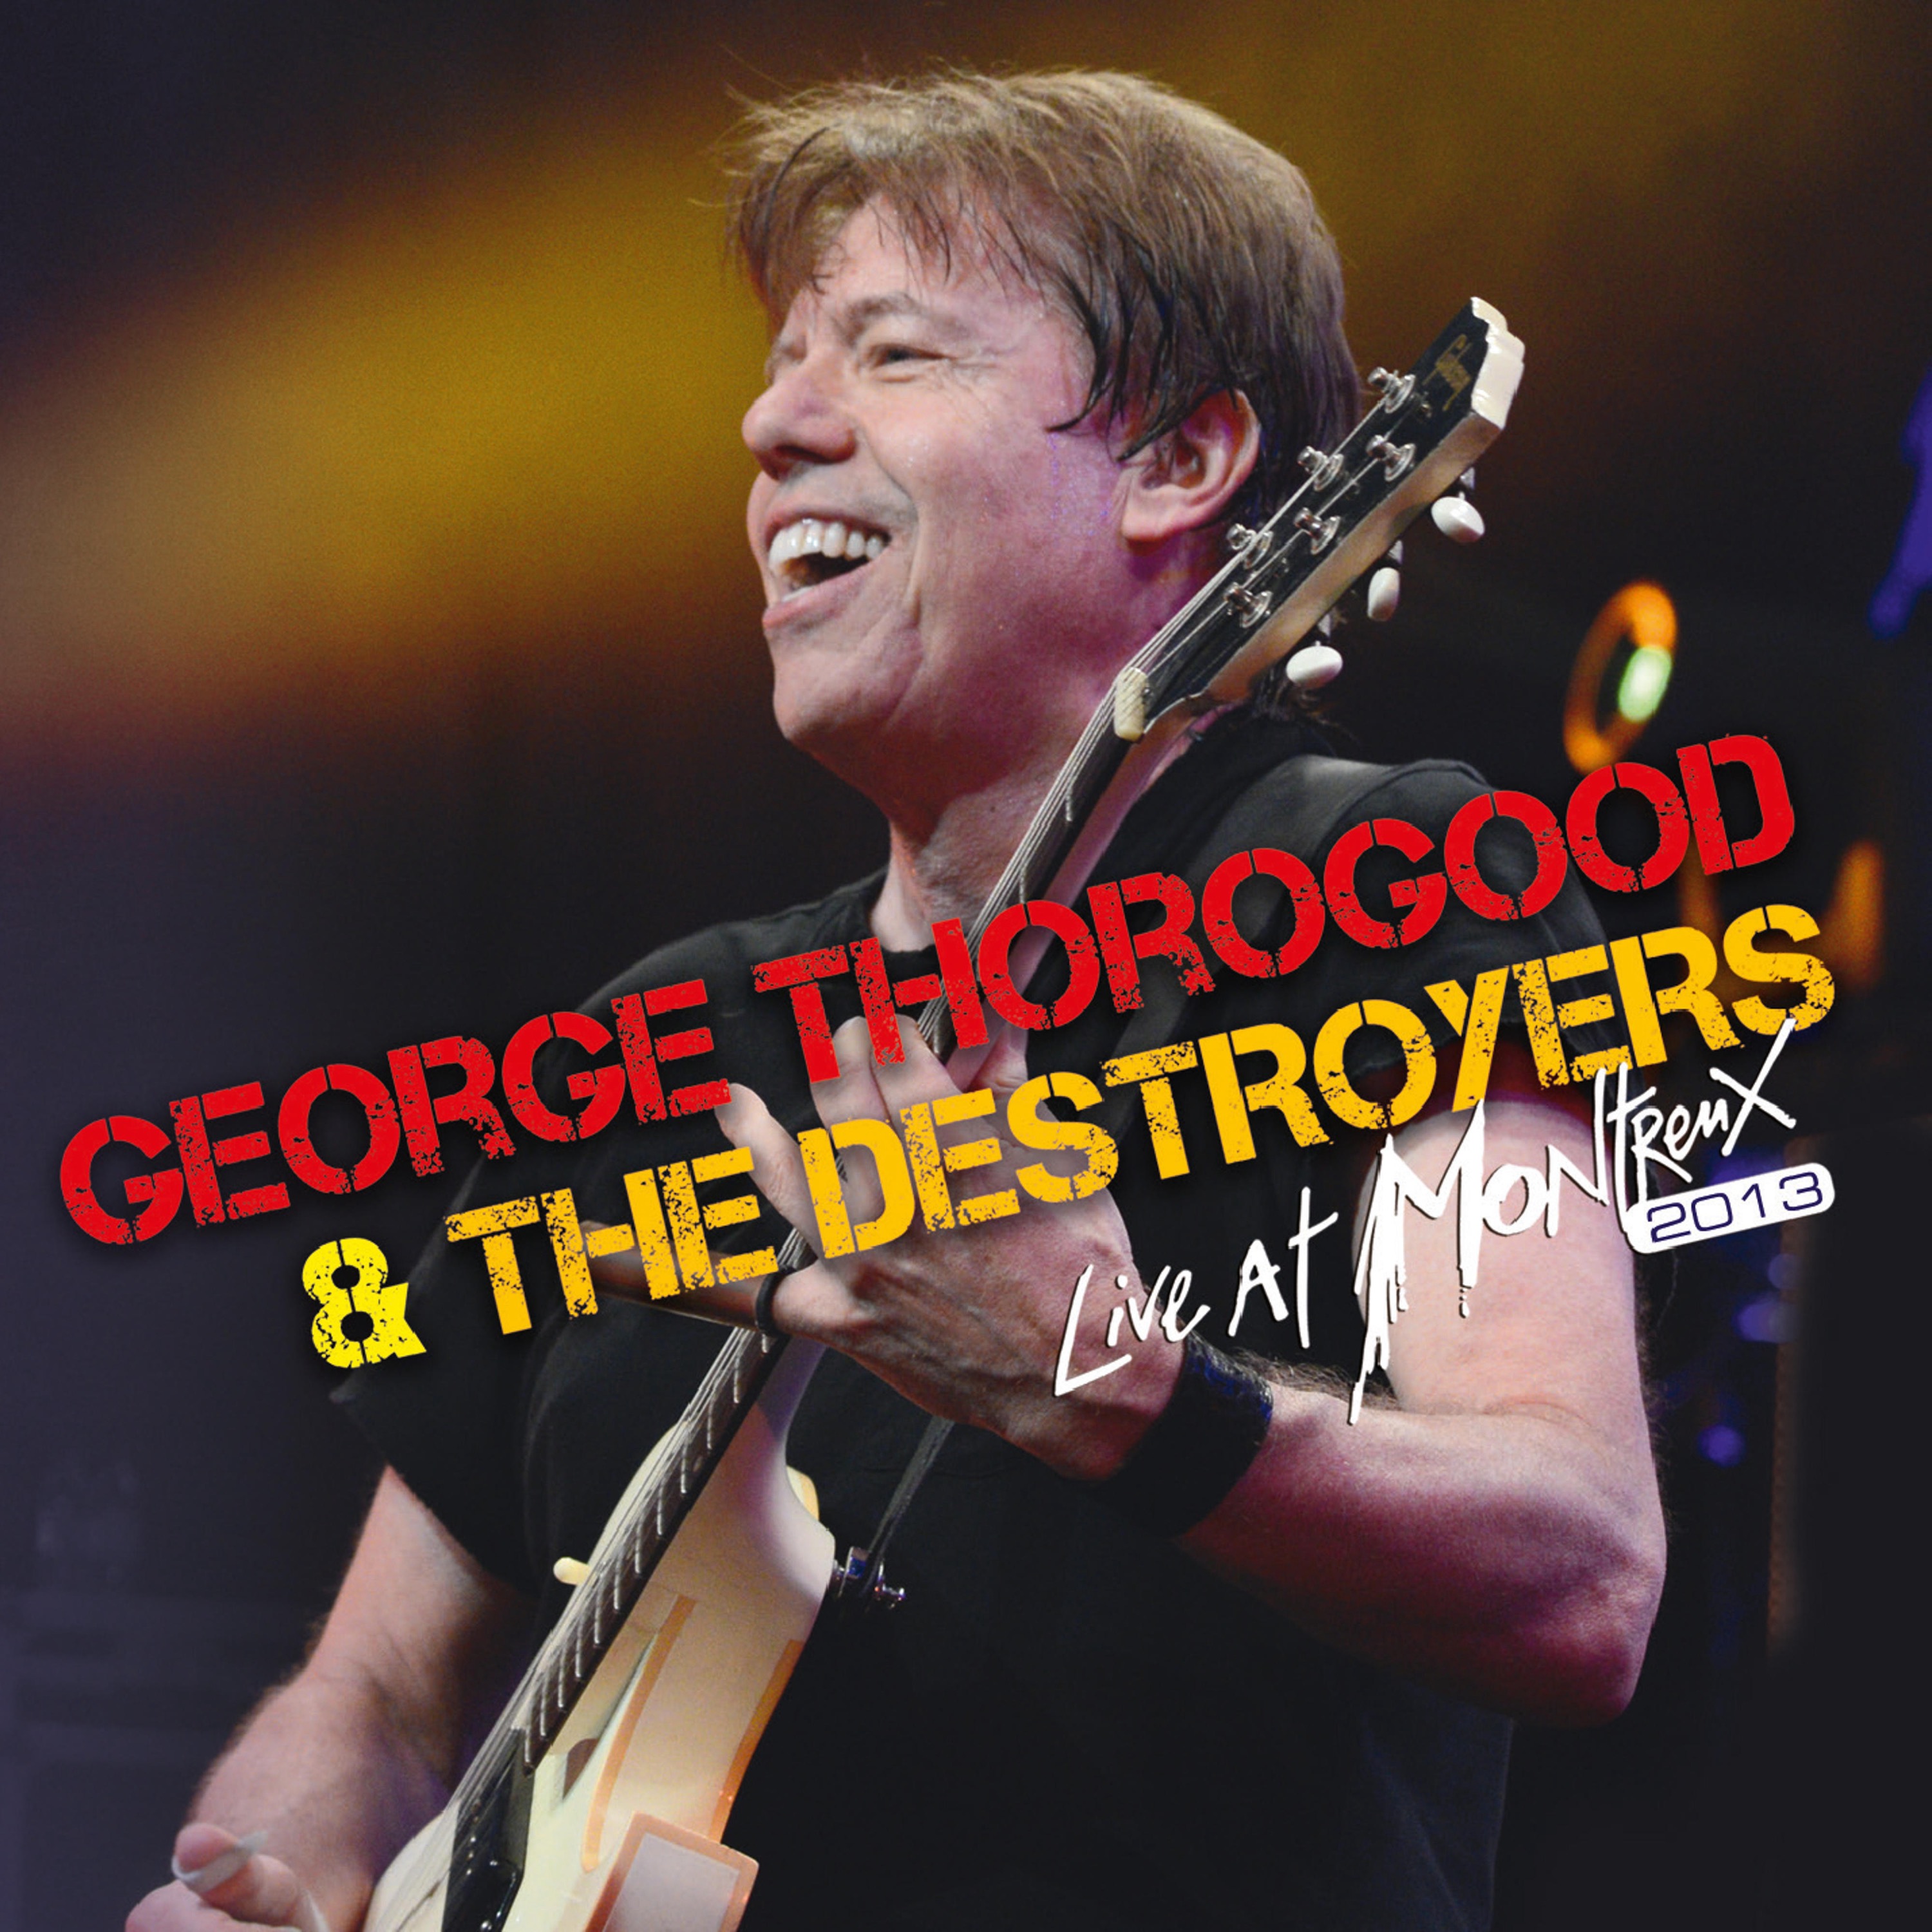 George Thorogood & The Destroyers - Live At Montreux 2013 - CD+DVD